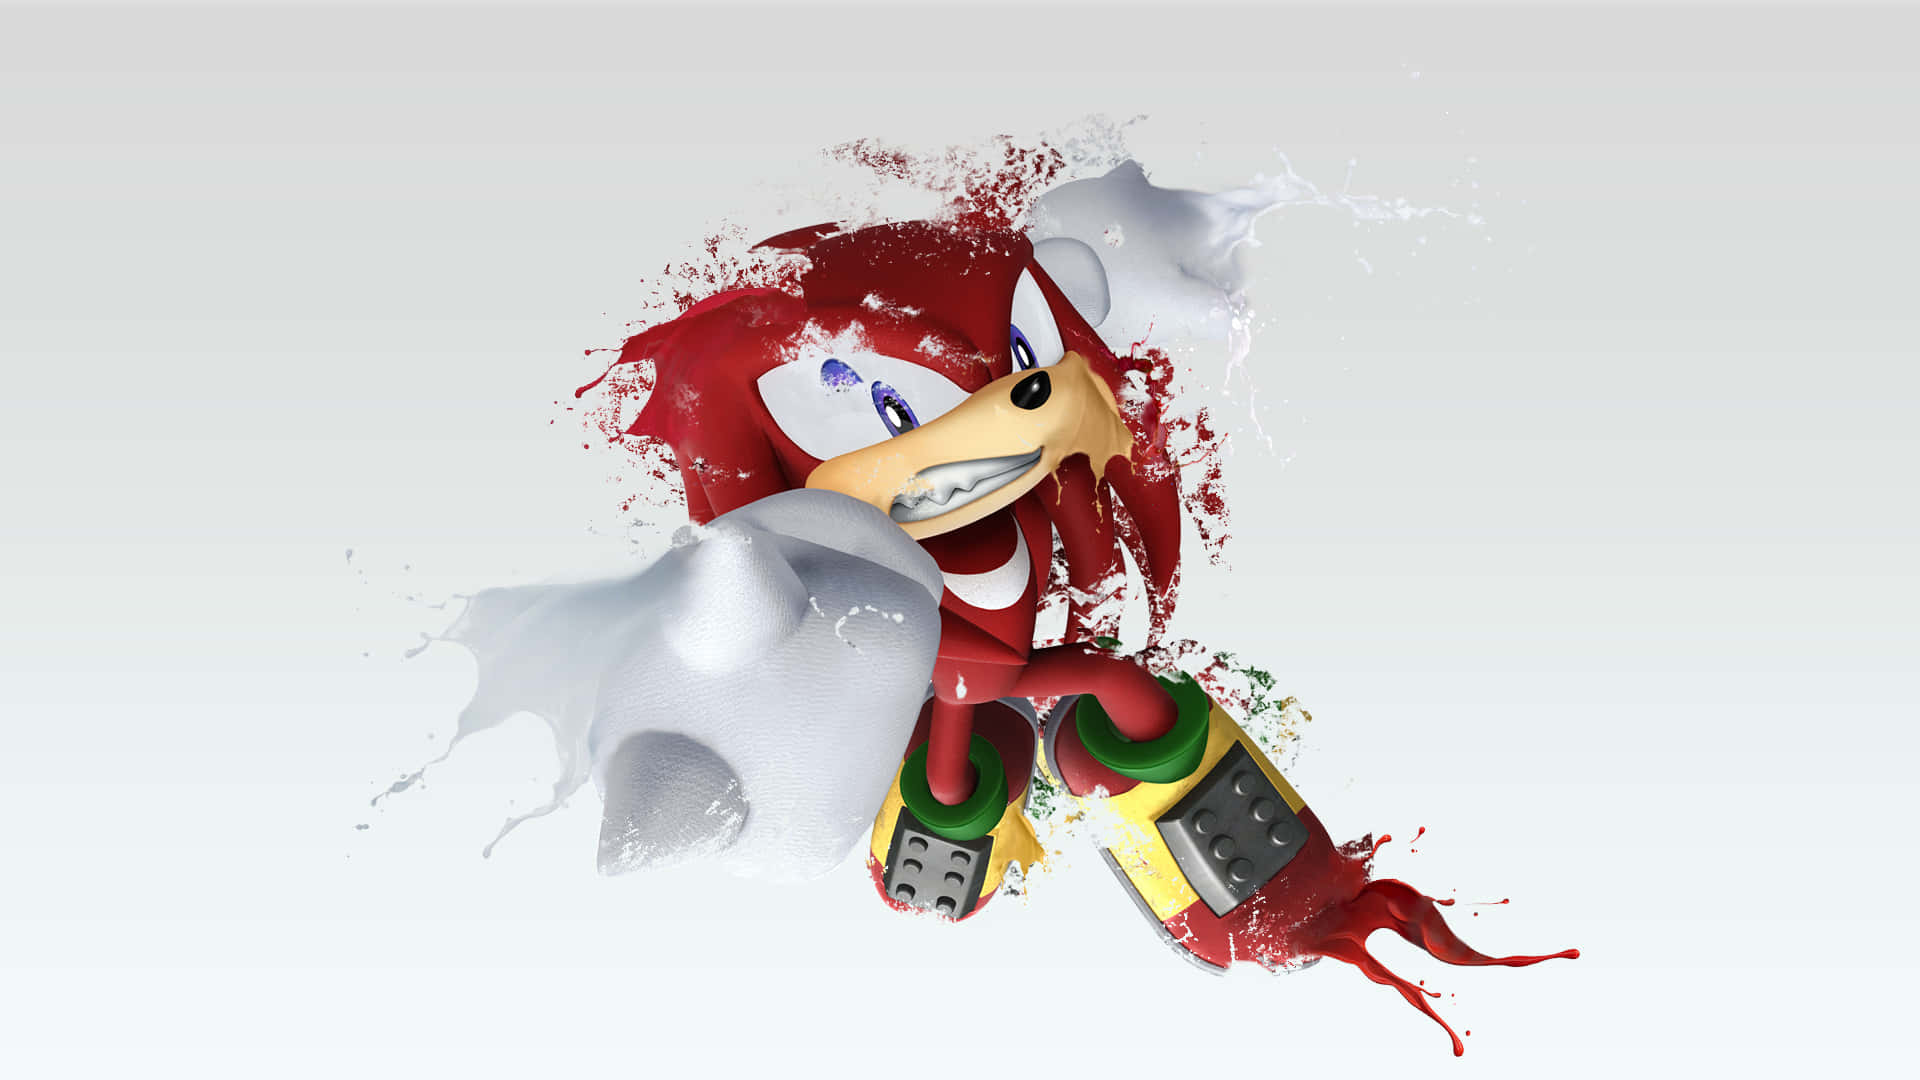 Raw Muscle Power of Knuckles Wallpaper